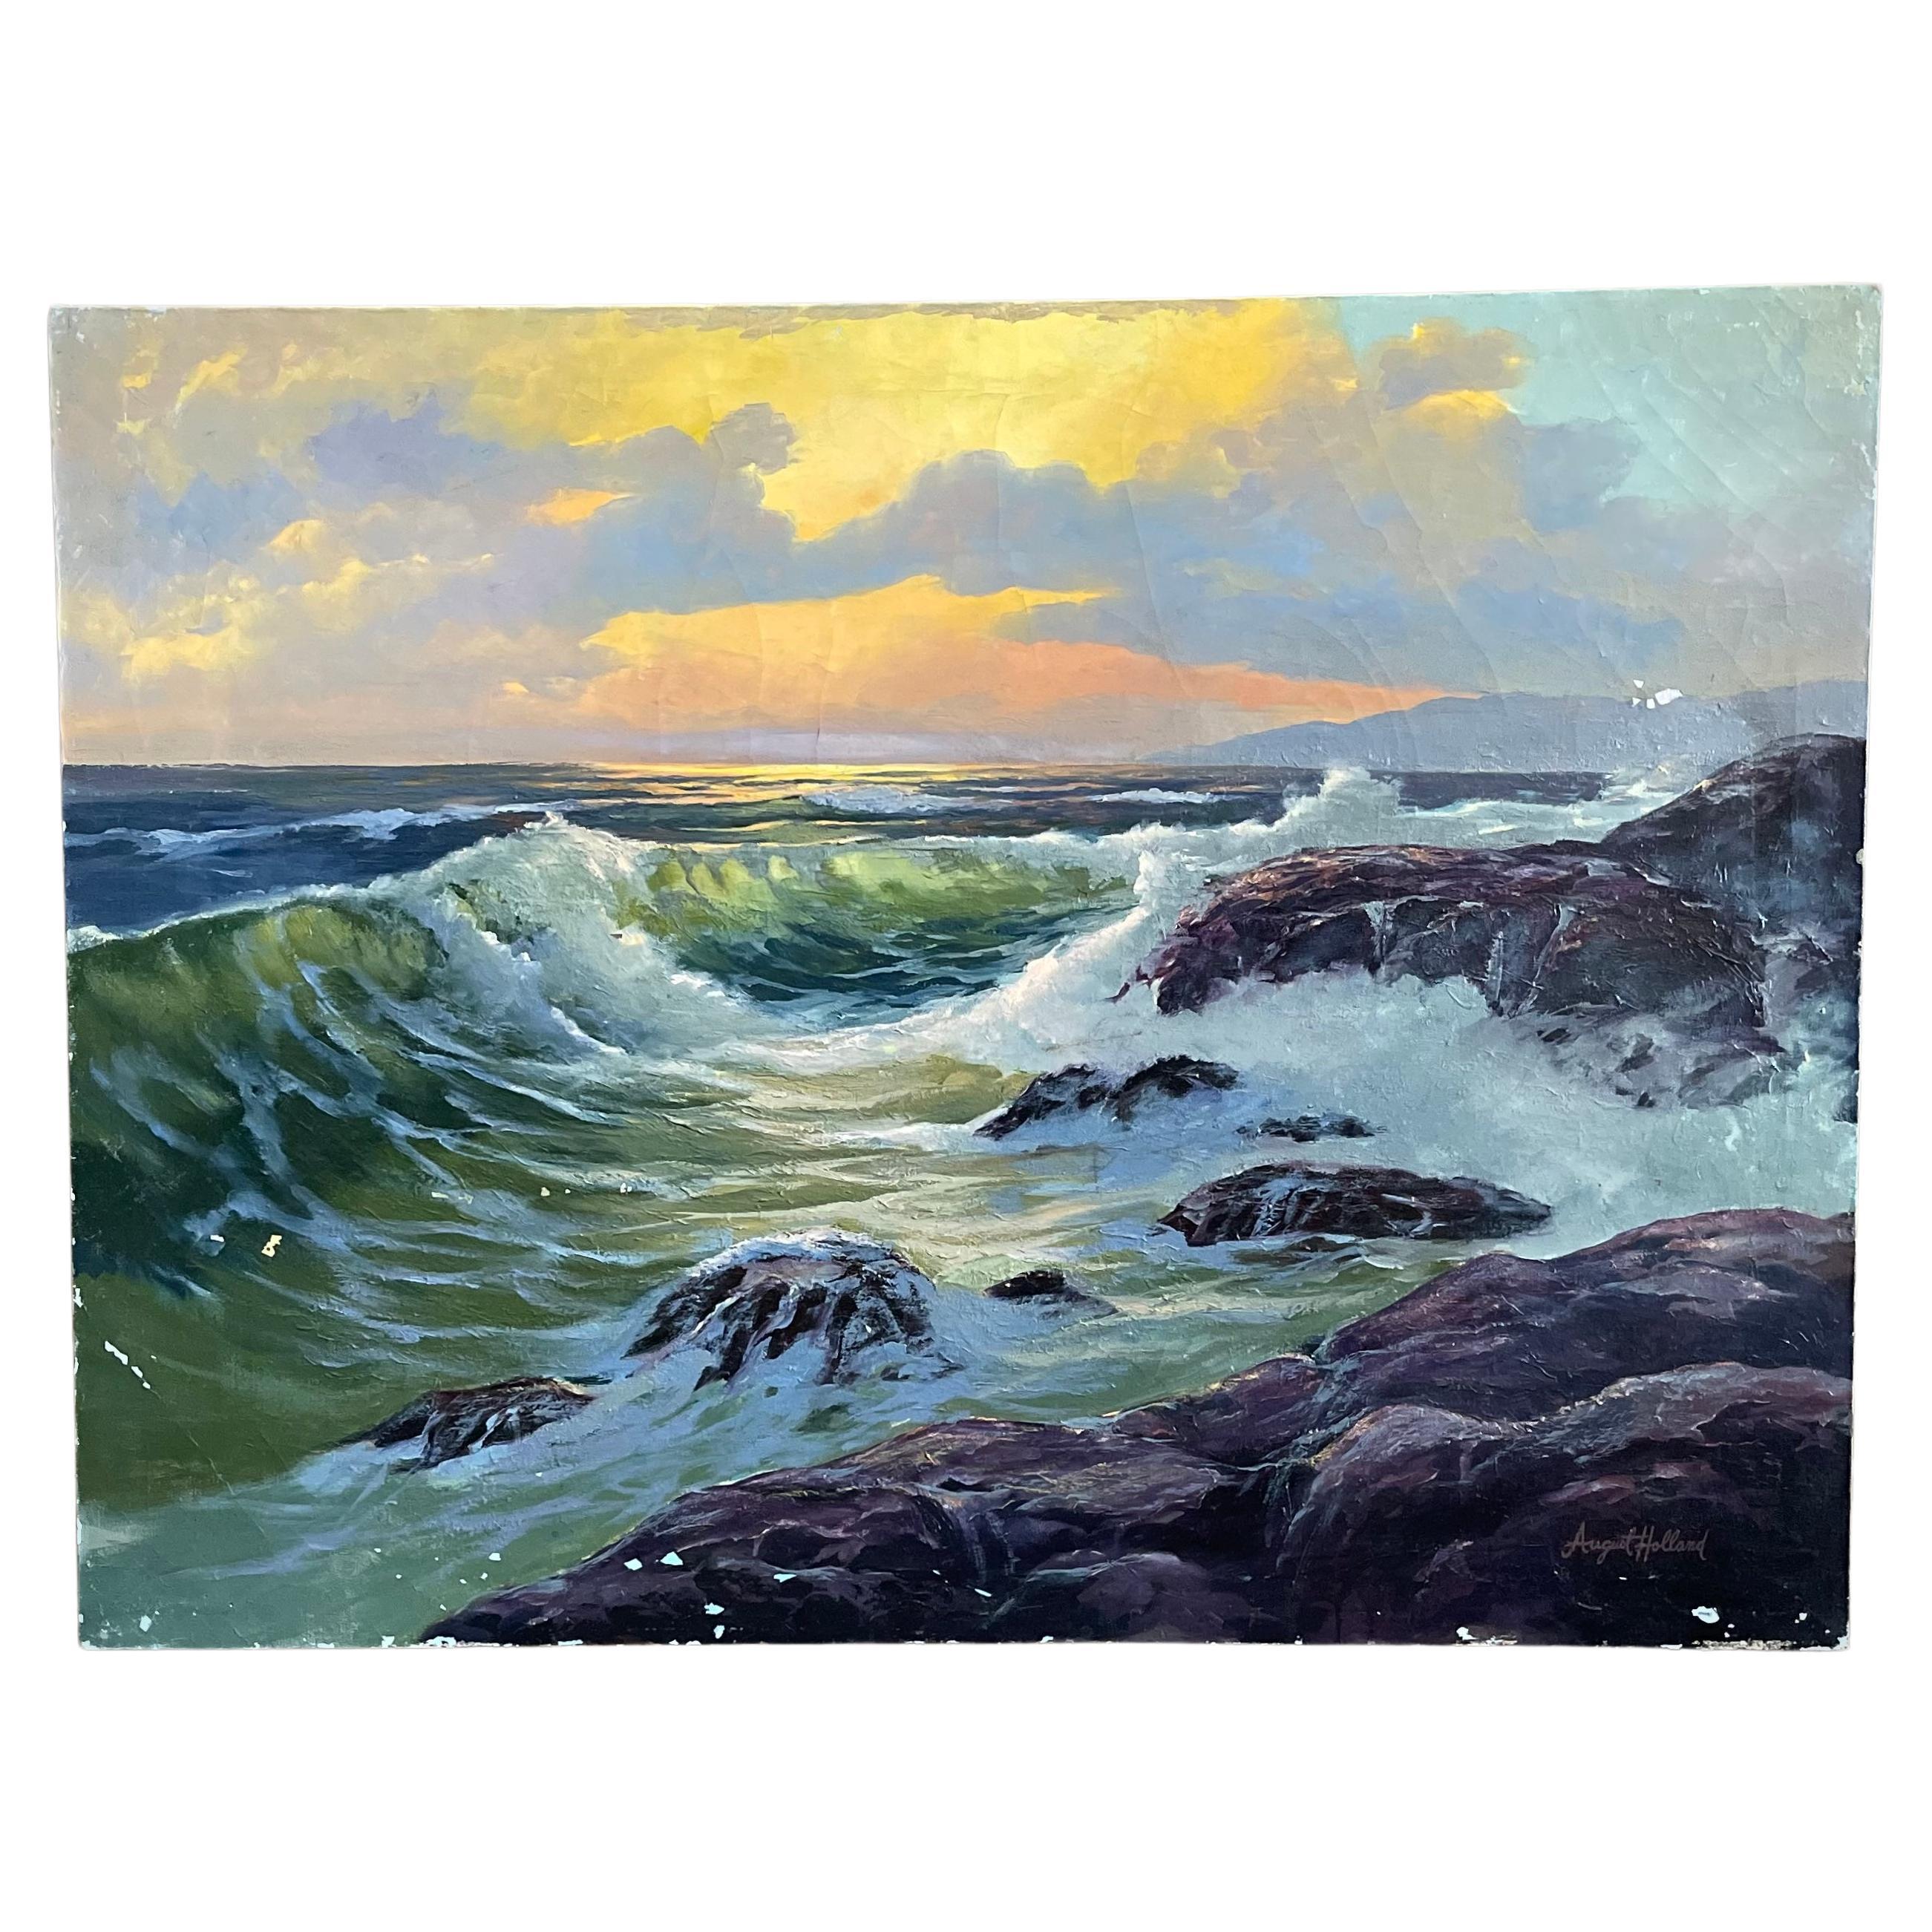 Crashing Waves Vintage Nautical Oil on Canvas Painting signed by August Holland